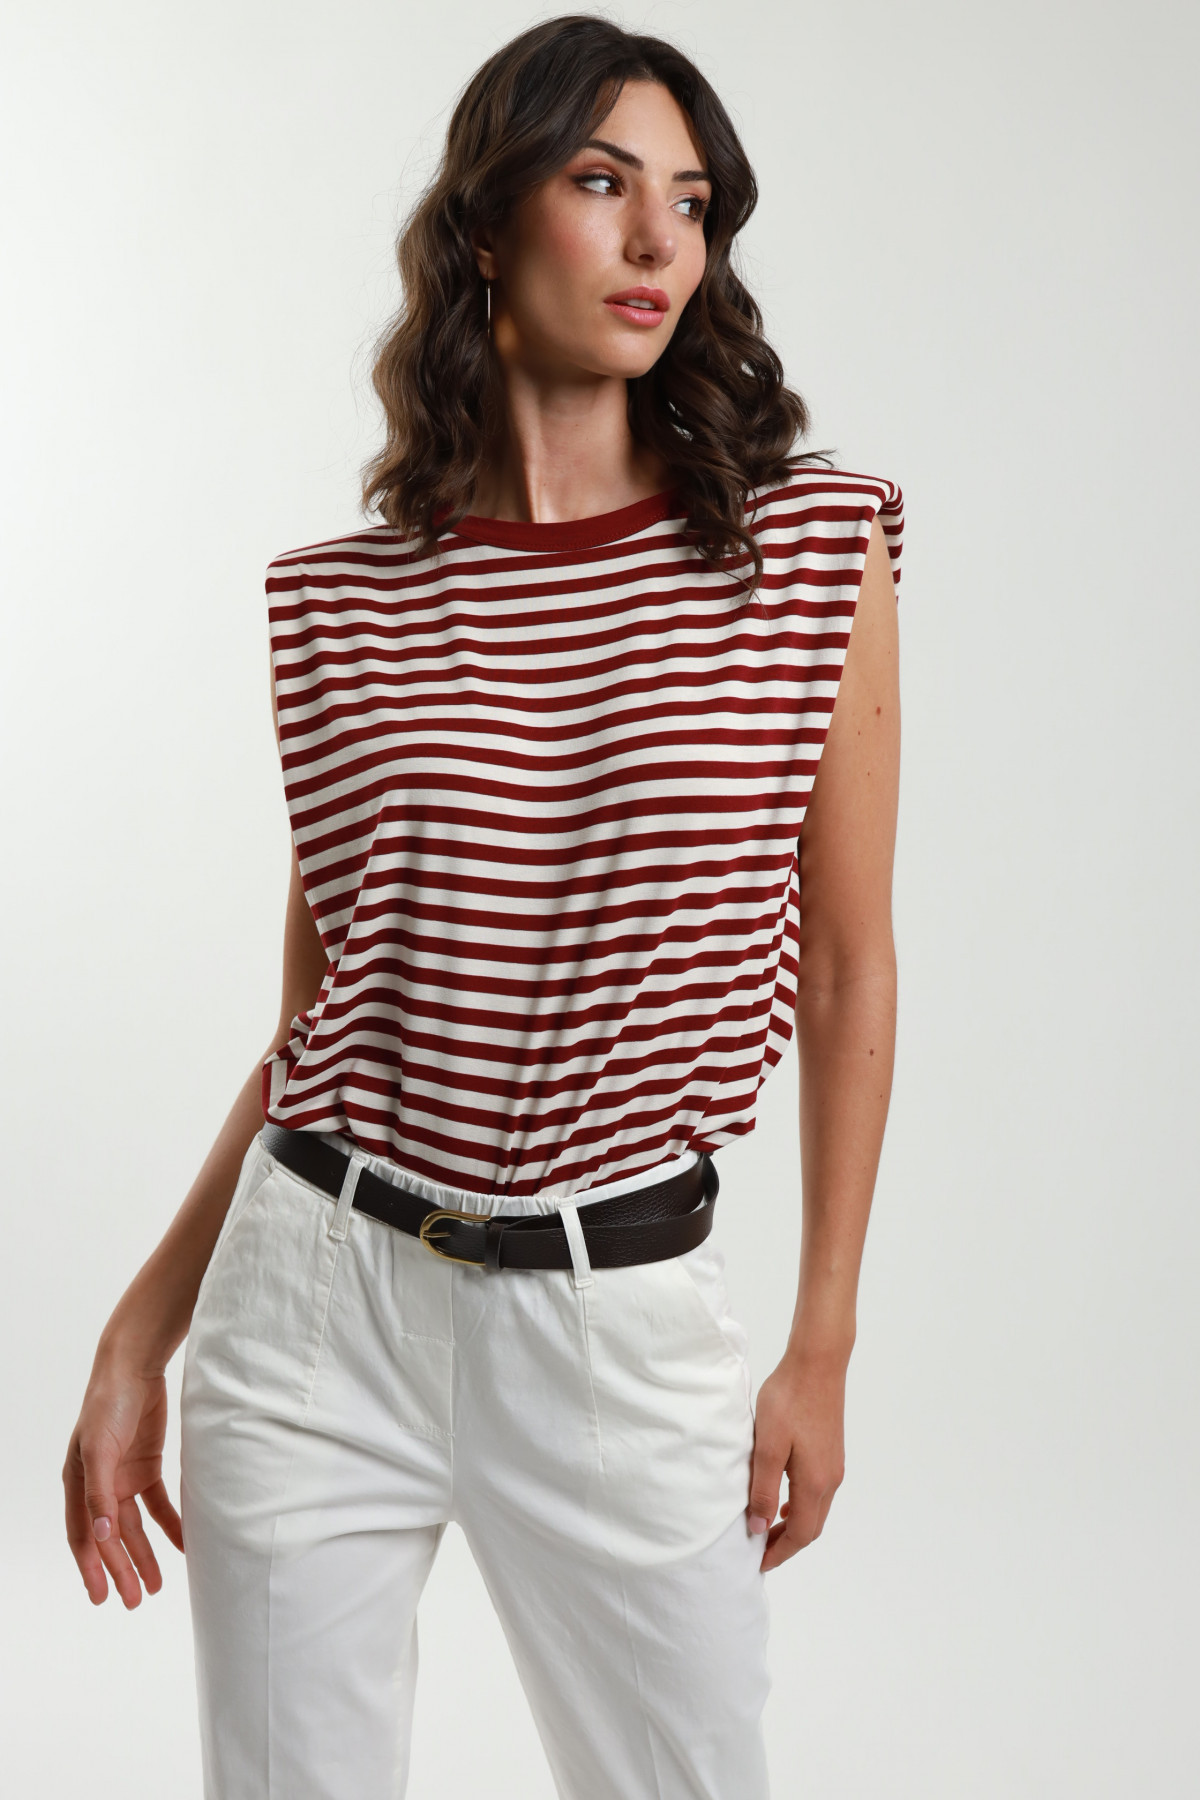 Striped tank top with shoulder pads